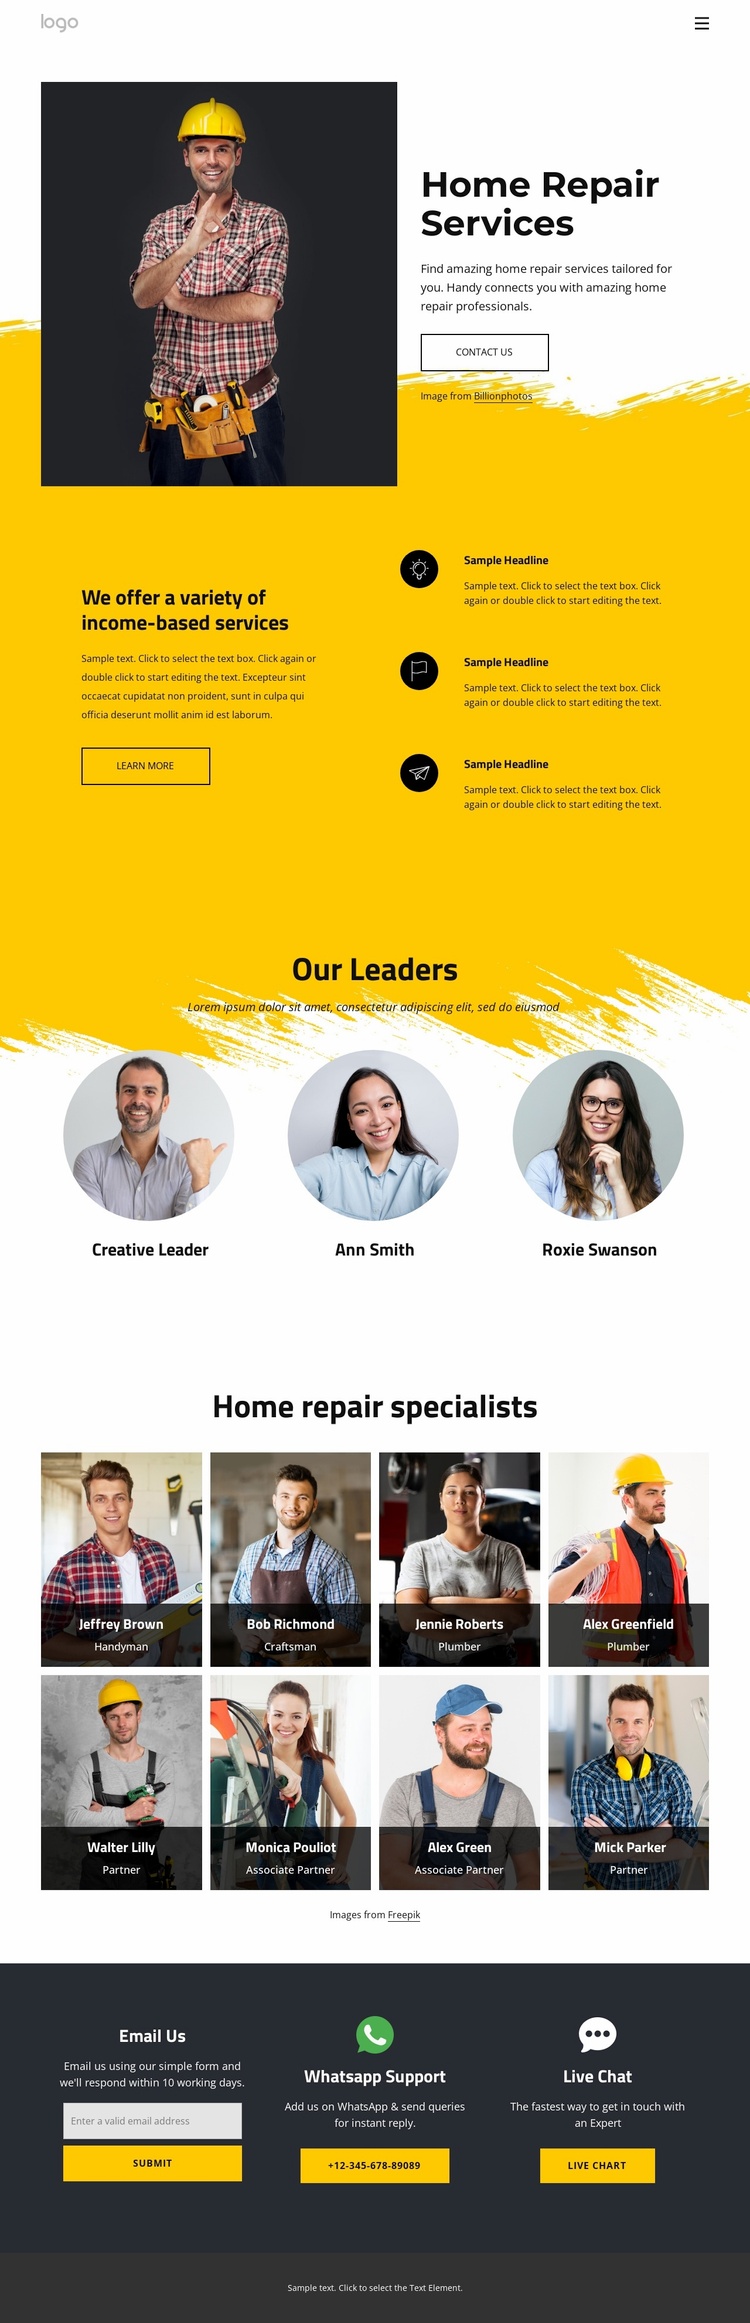 Find home repair services today Ecommerce Website Design